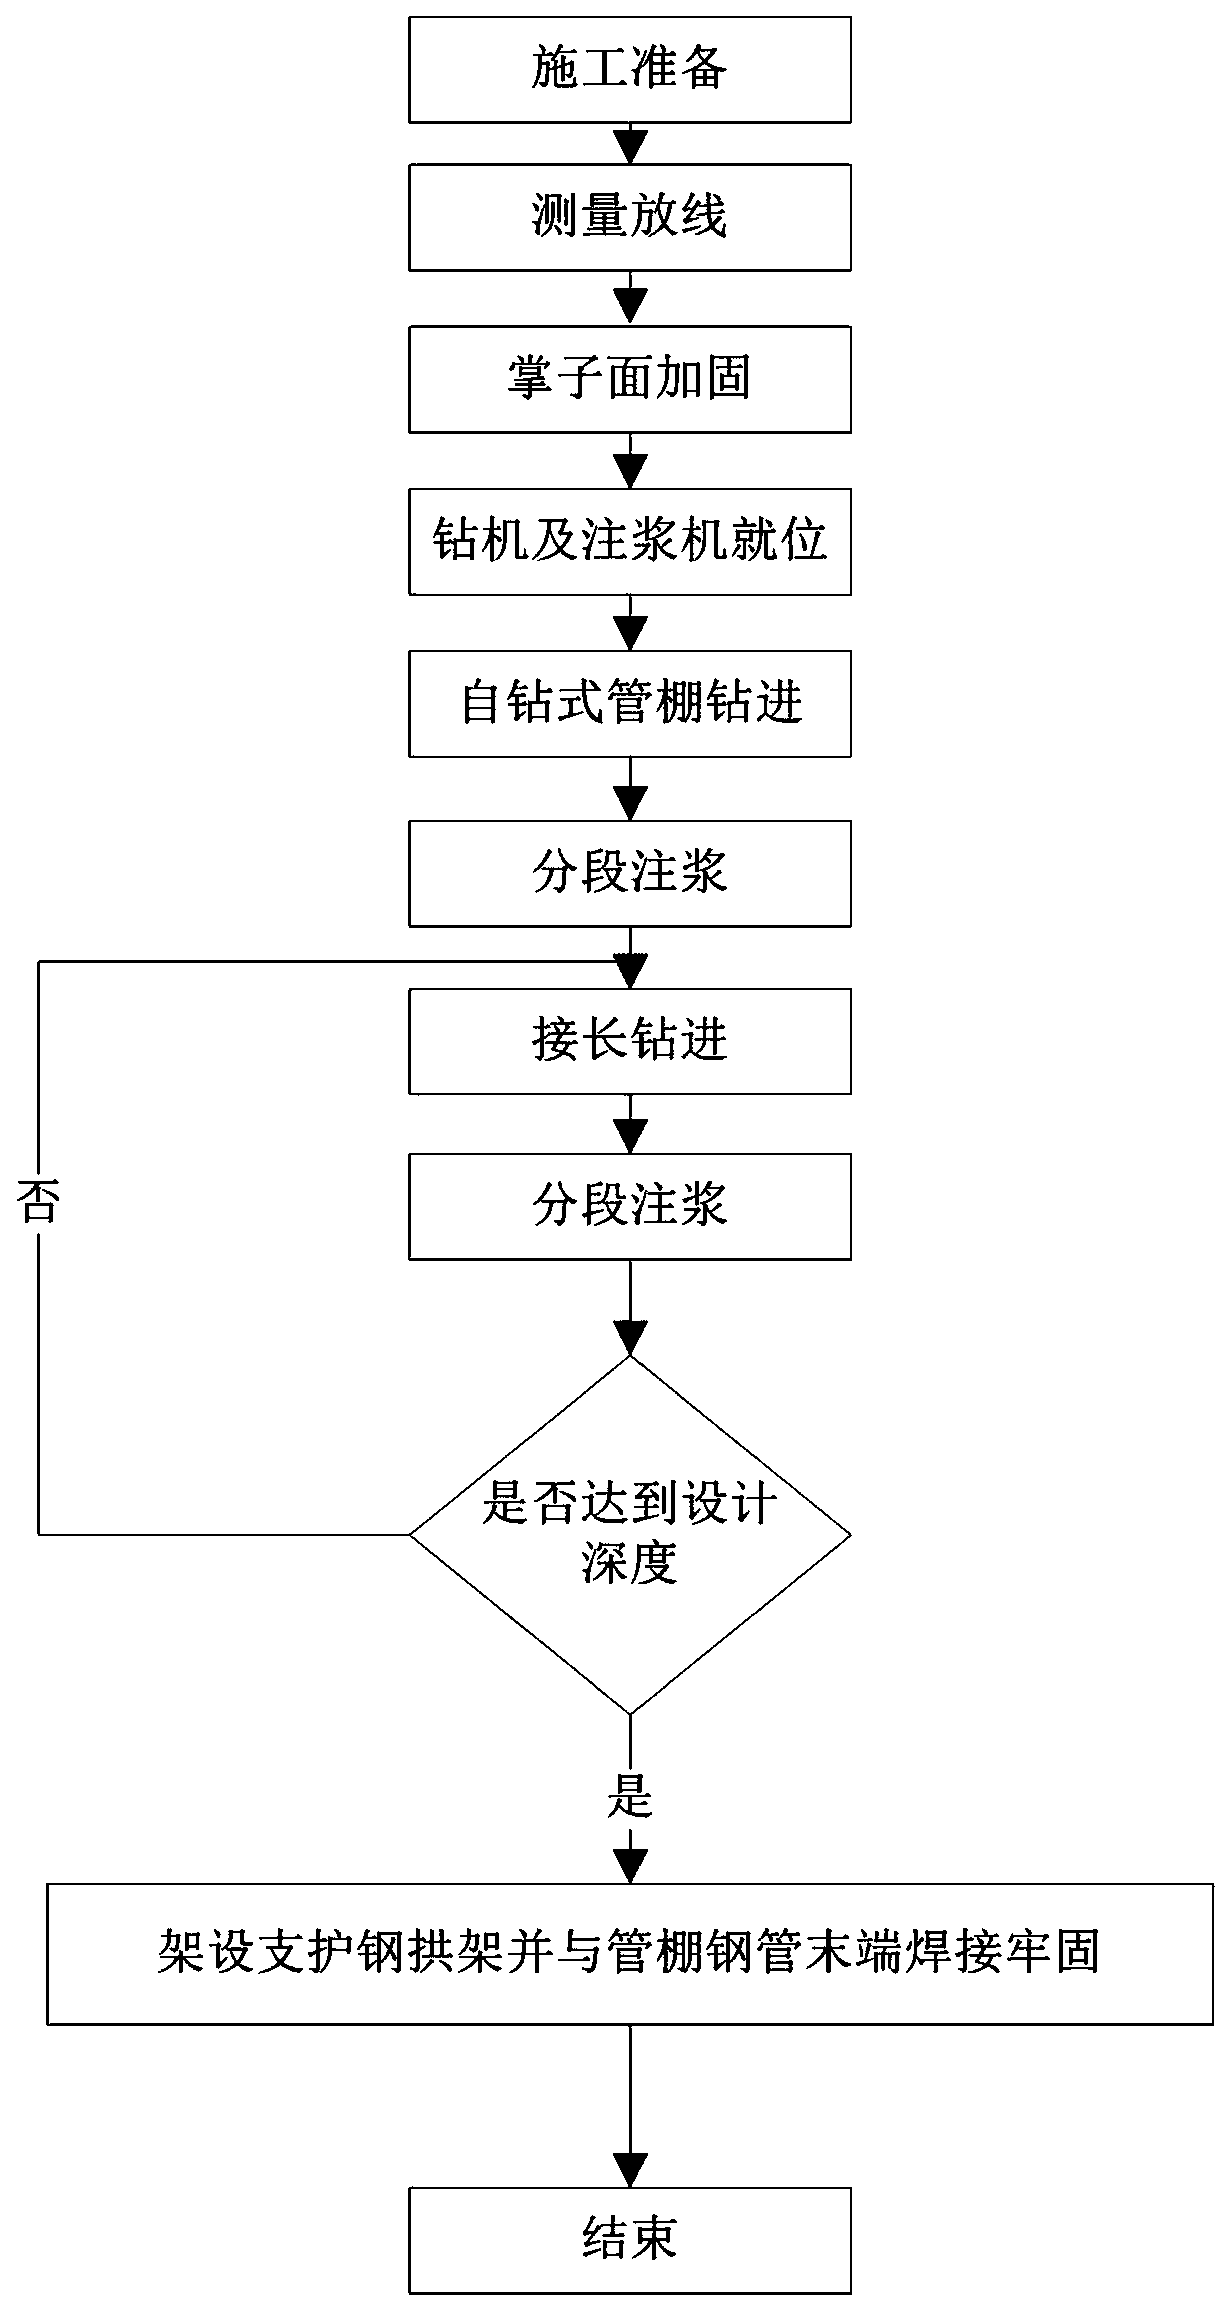 Sectional grouting and self-drilling-type pipe shed advance support method